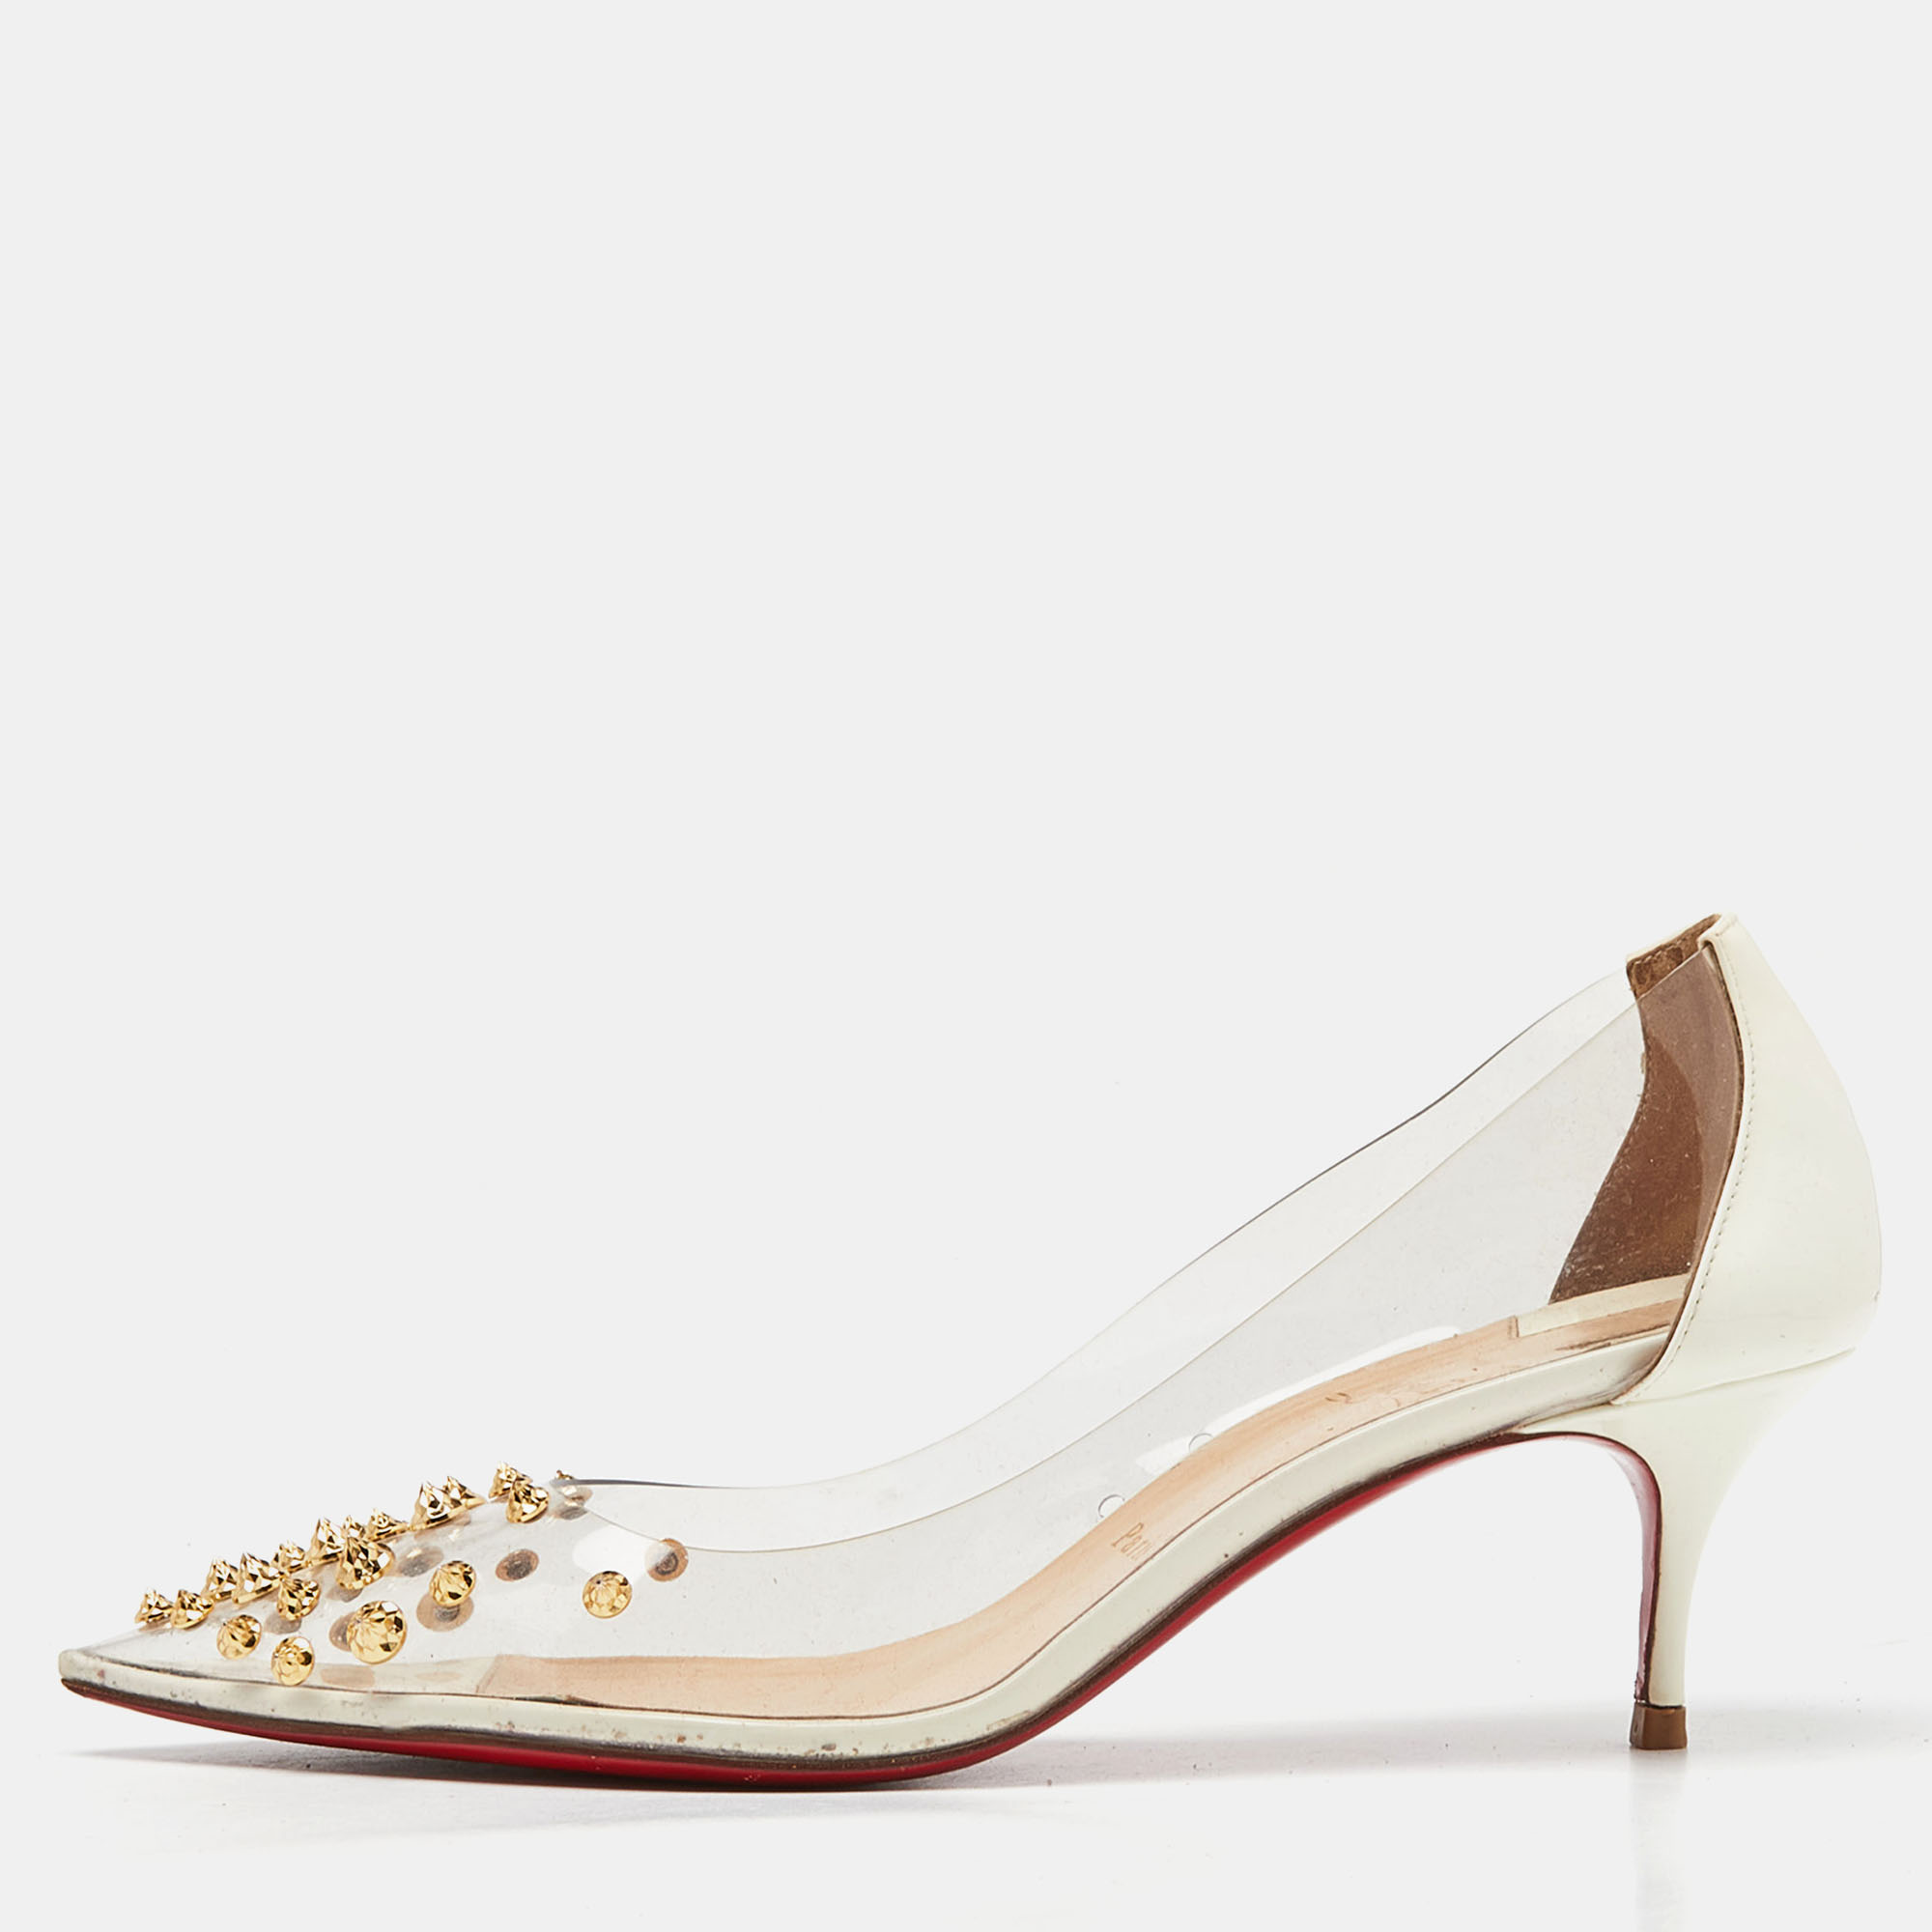 Christian louboutin white patent leather and pvc collaclou spiked pointed toe pumps size 40